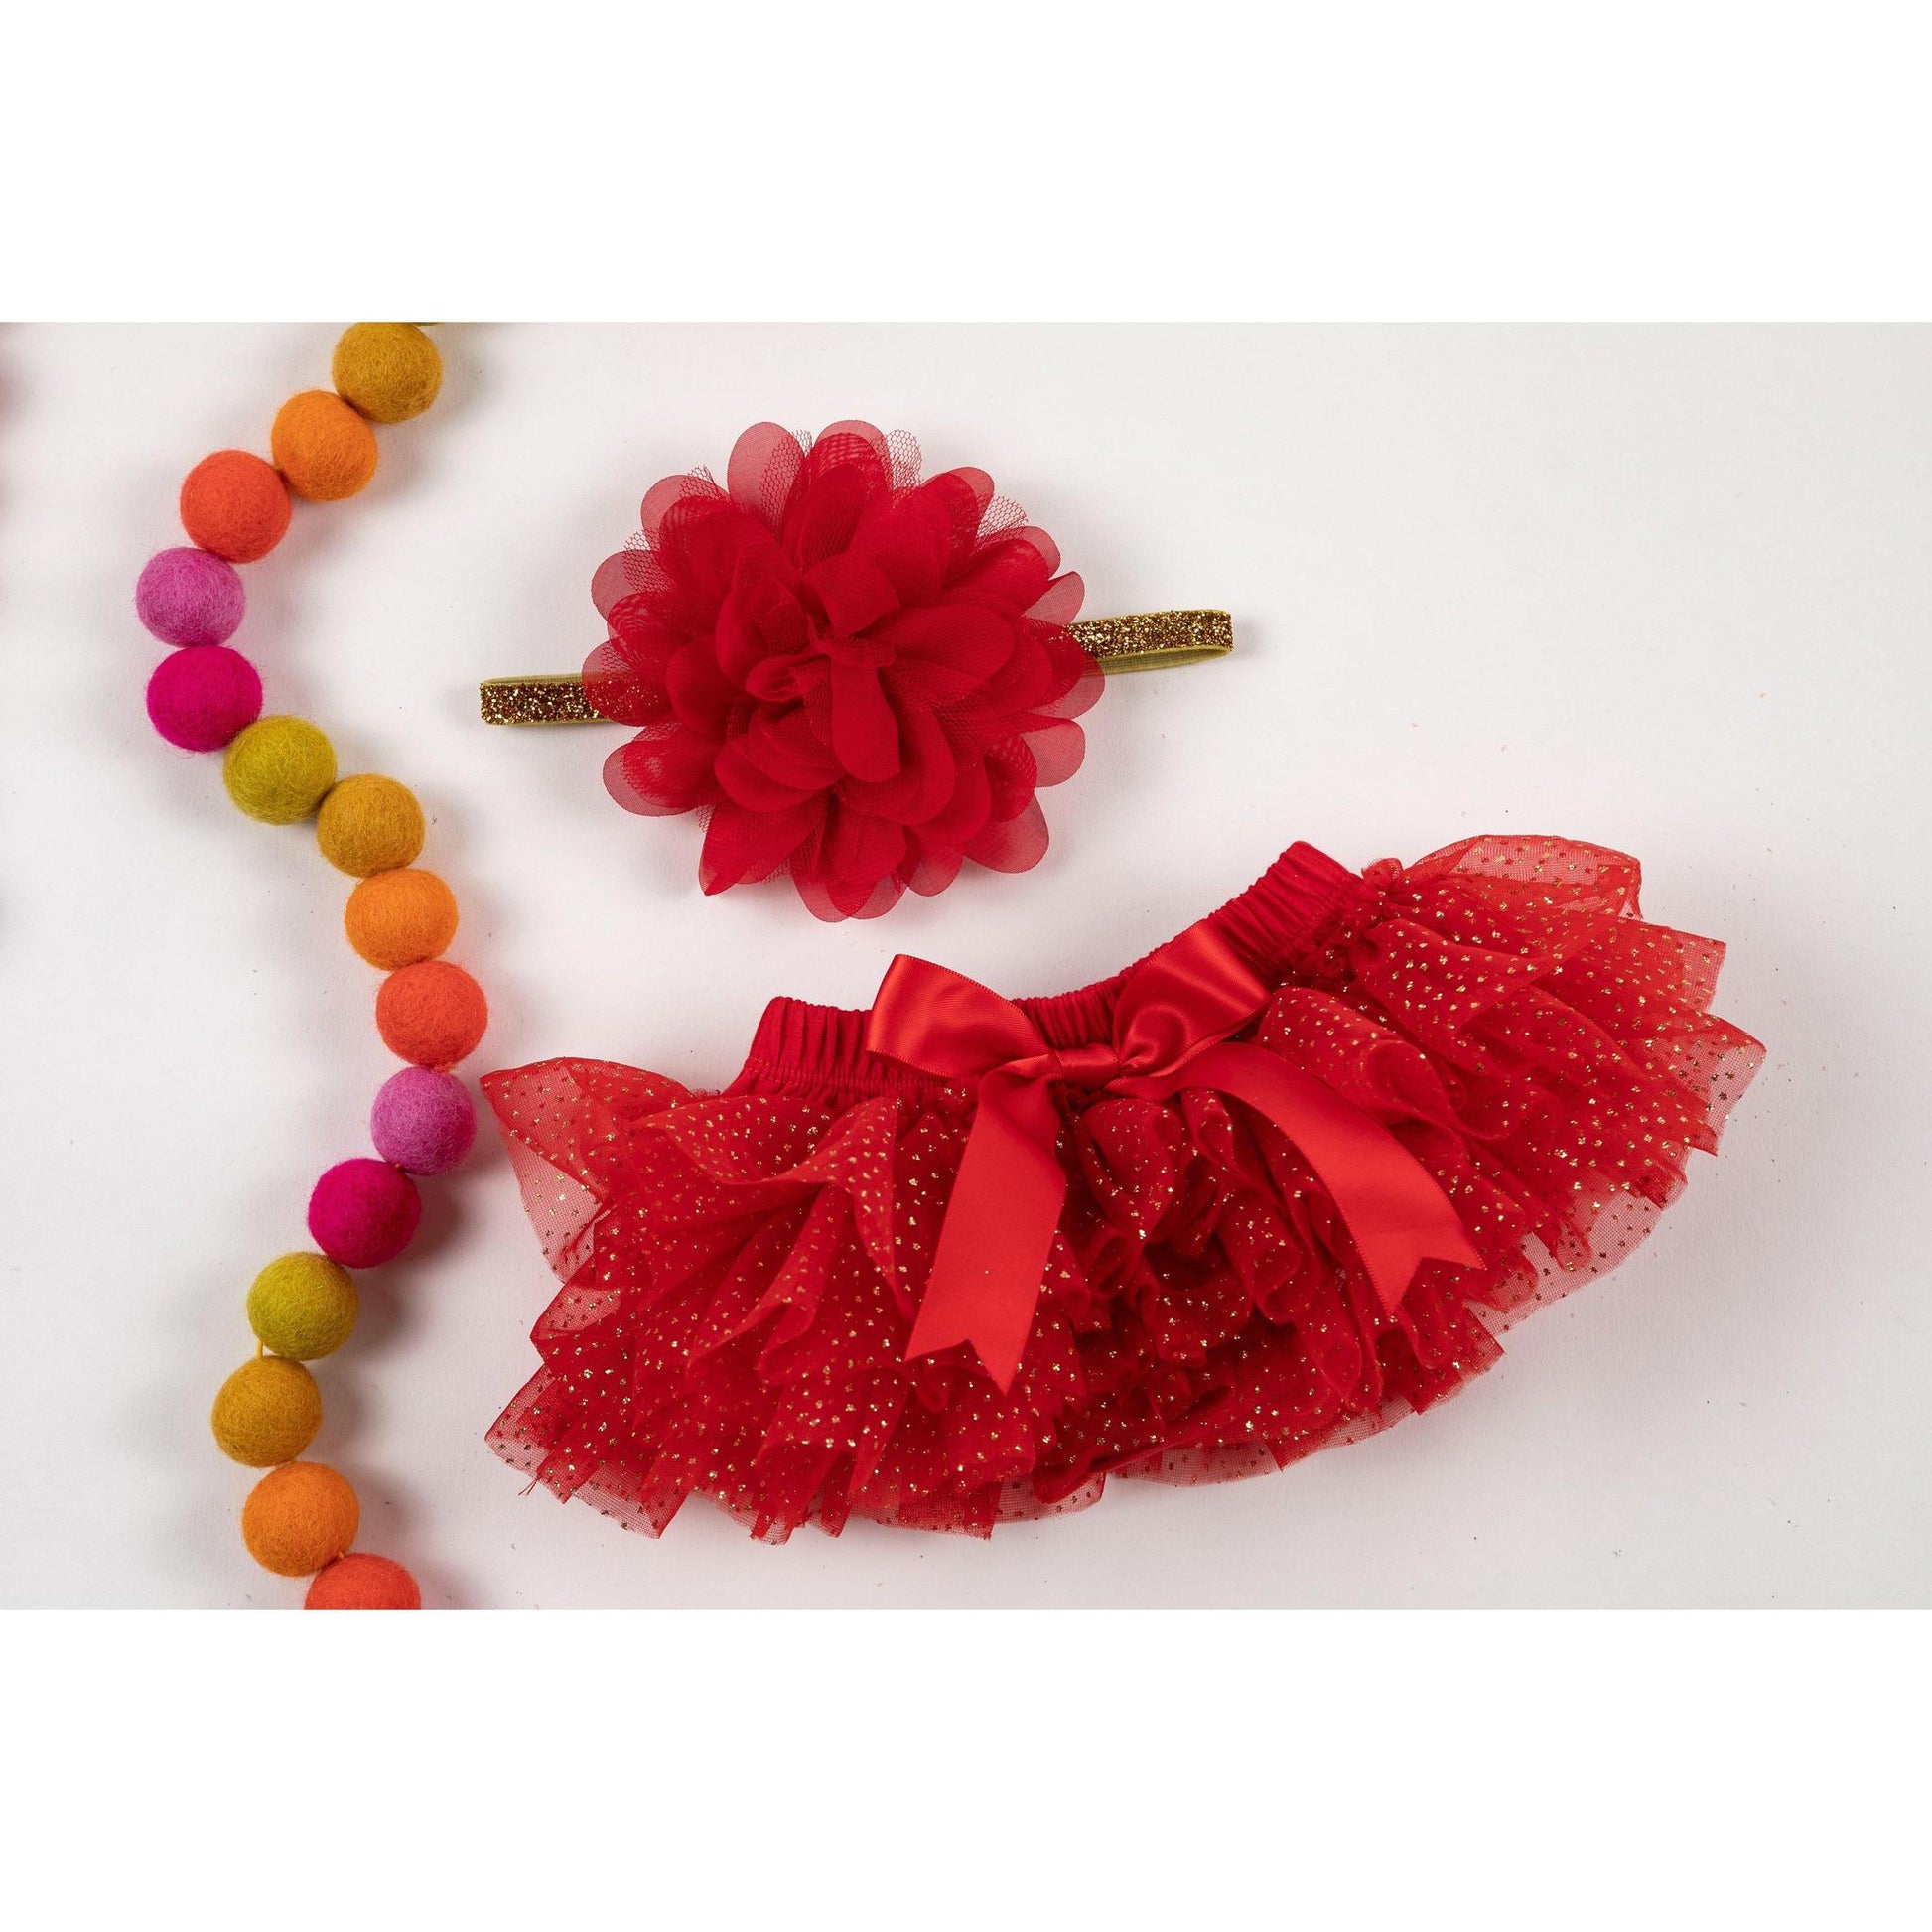 Red with Gold Glitter Tutu Bloomer and Headband Set  - Doodlebug's Children's Boutique